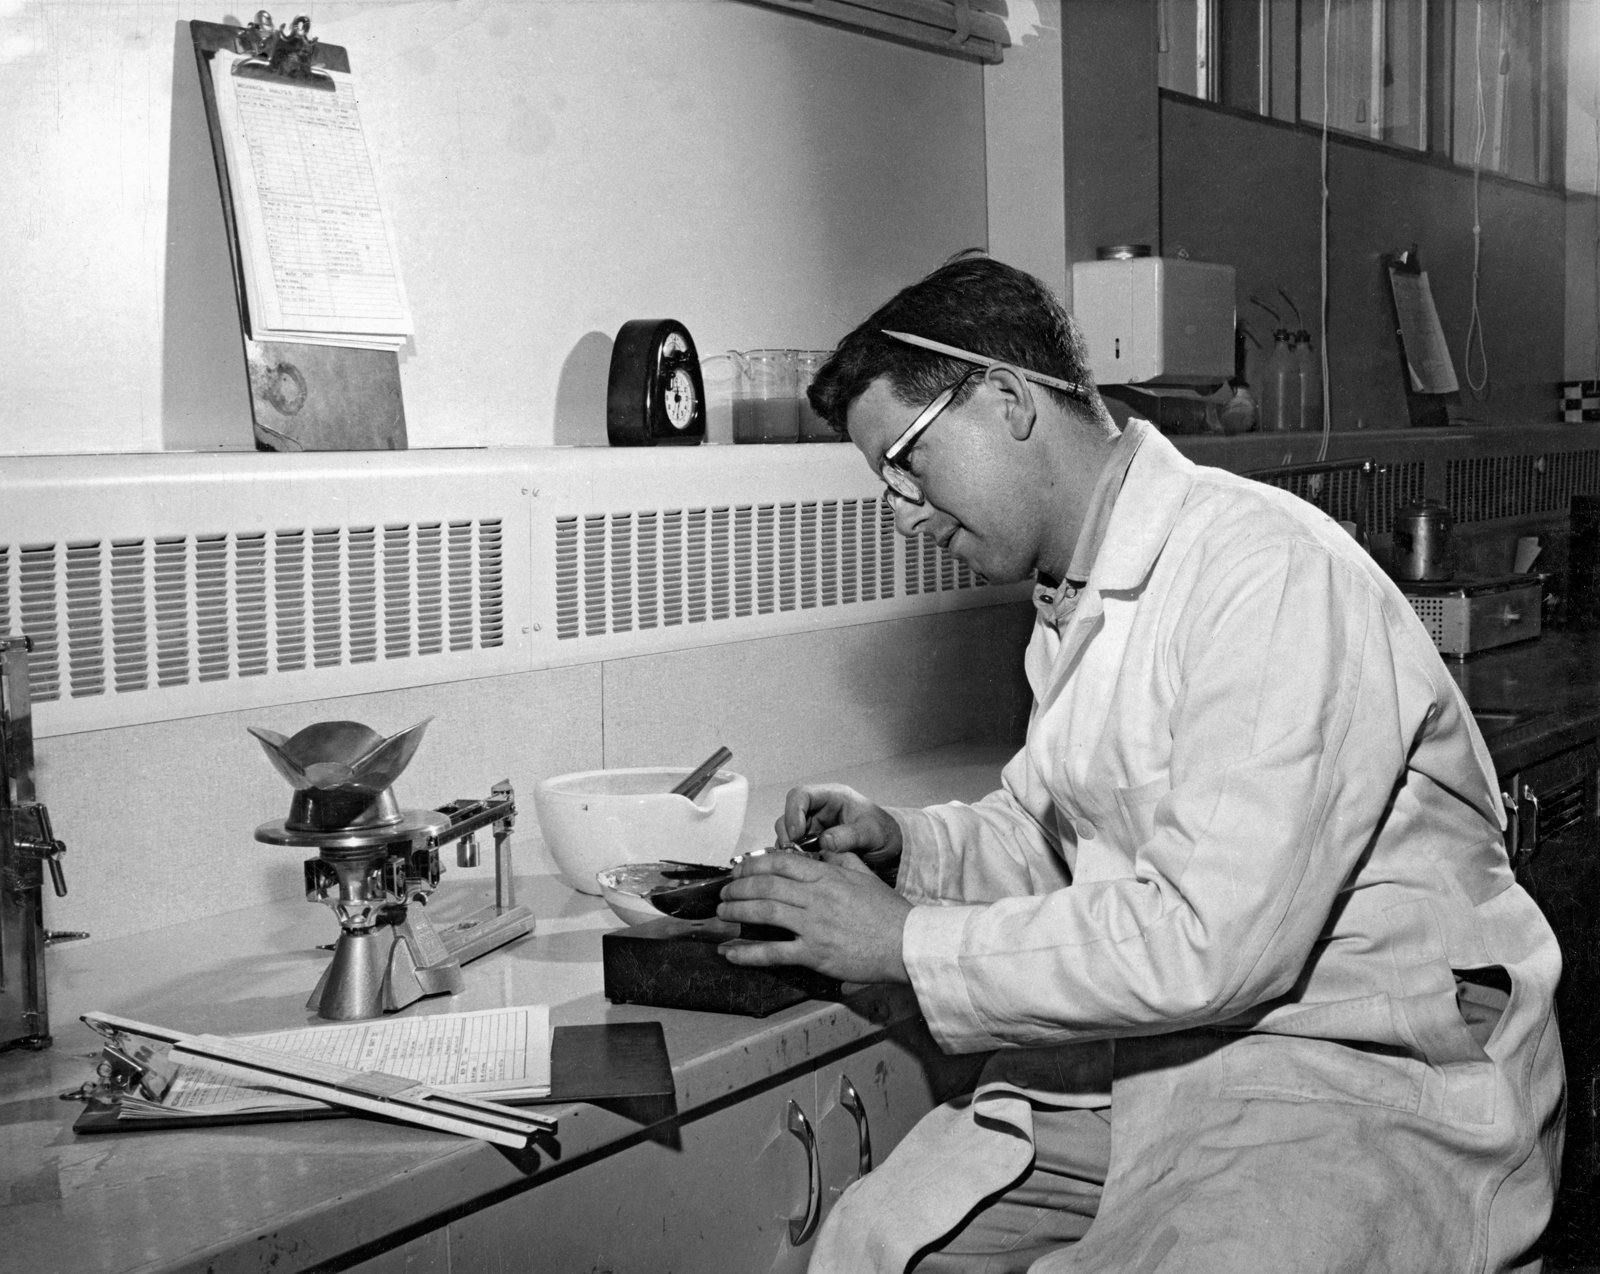 Soils technician Bill working for the Provincial government, 1959.